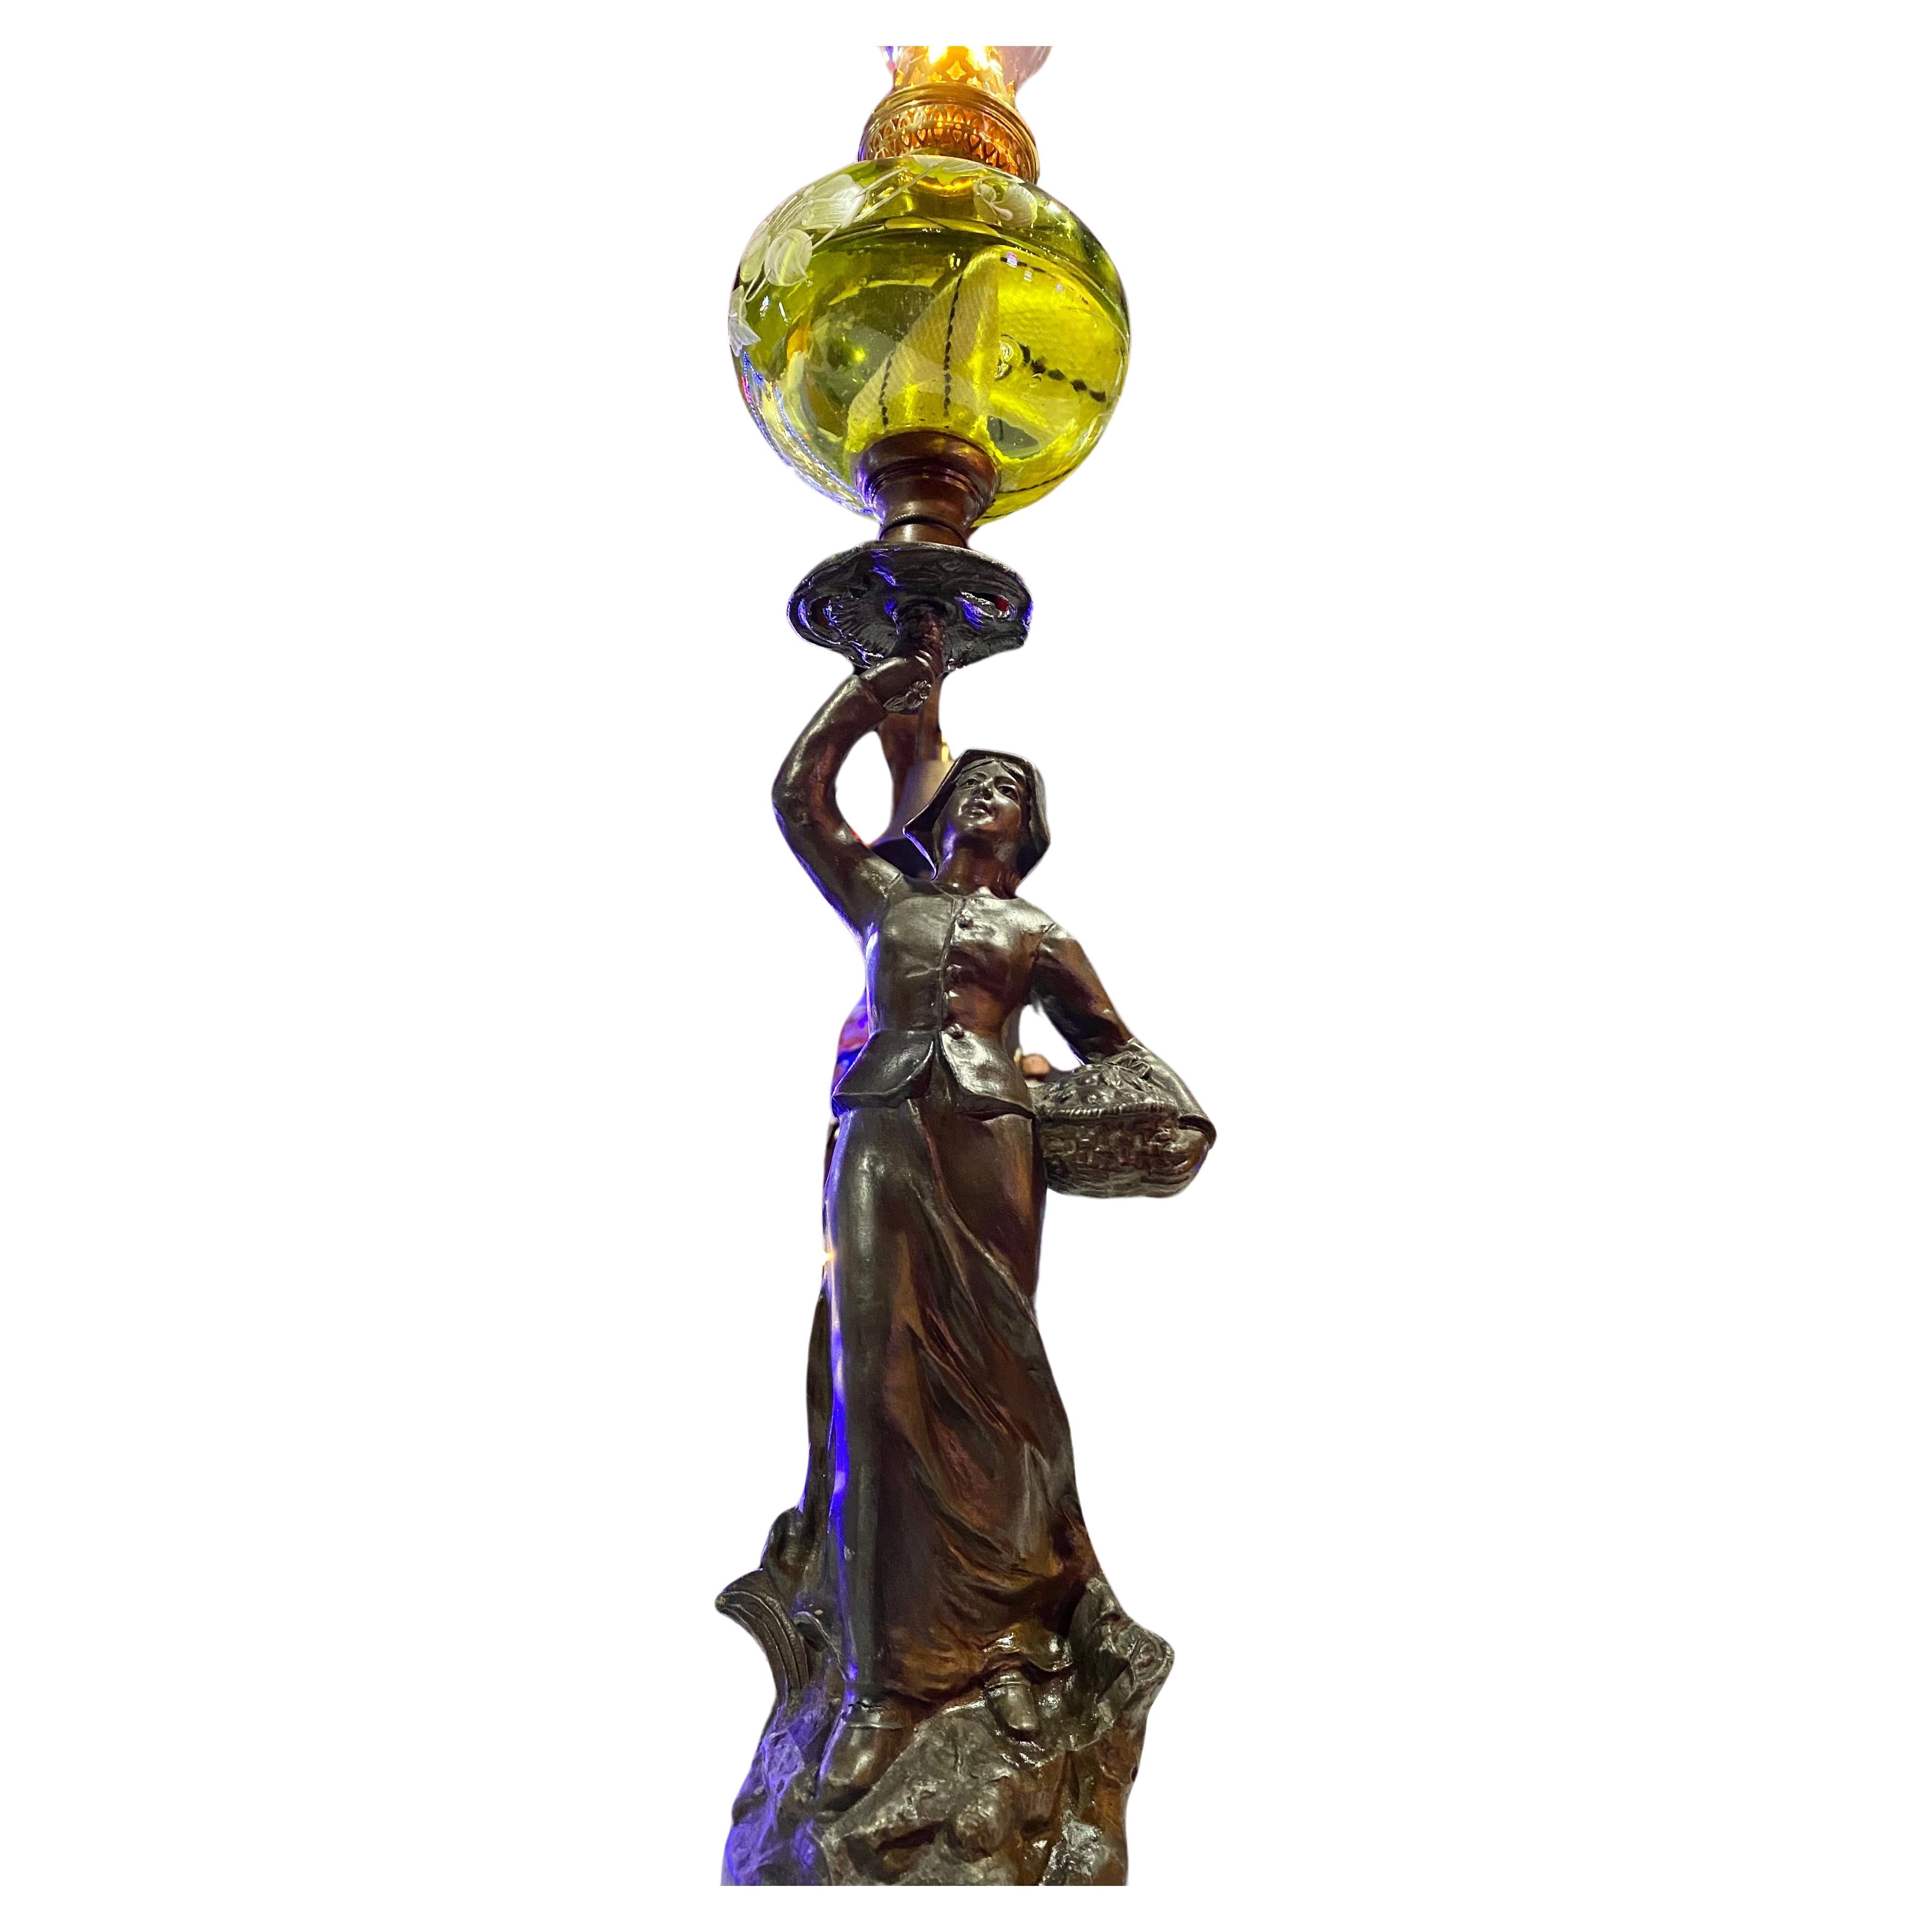 Important 19th century French Art Nouveau oil torchiere lamp with hand painted floral green glass shade and glass chimney, rising on a circular faux bois wood base with brass placard reading; LA CUEILLETTE,
Par Maroeau.  
Elegant sculpture with